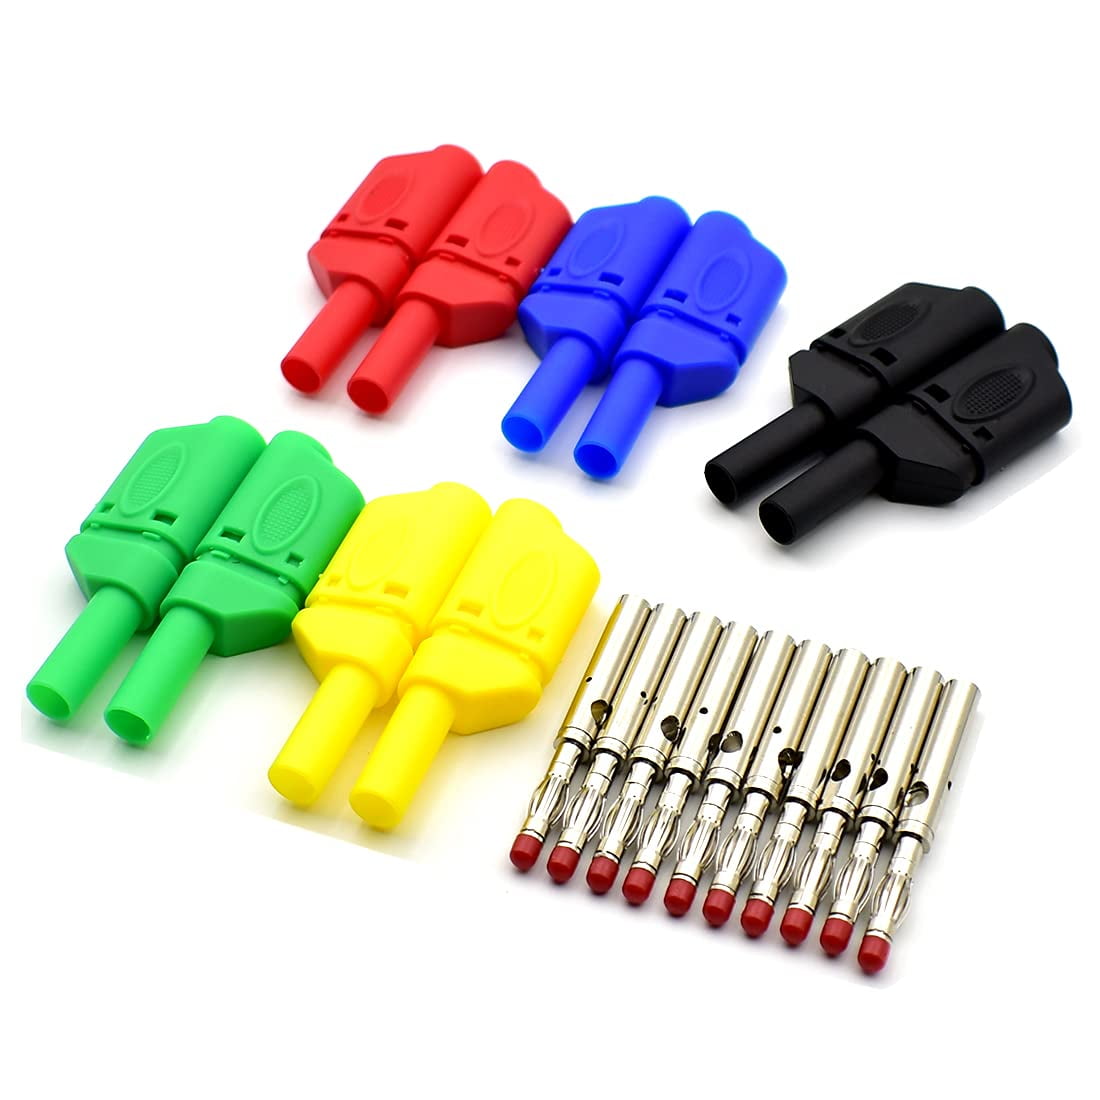 1 set High Quality Stackable Full Insulated Audio Power 4mm Banana Plug 5 colors 